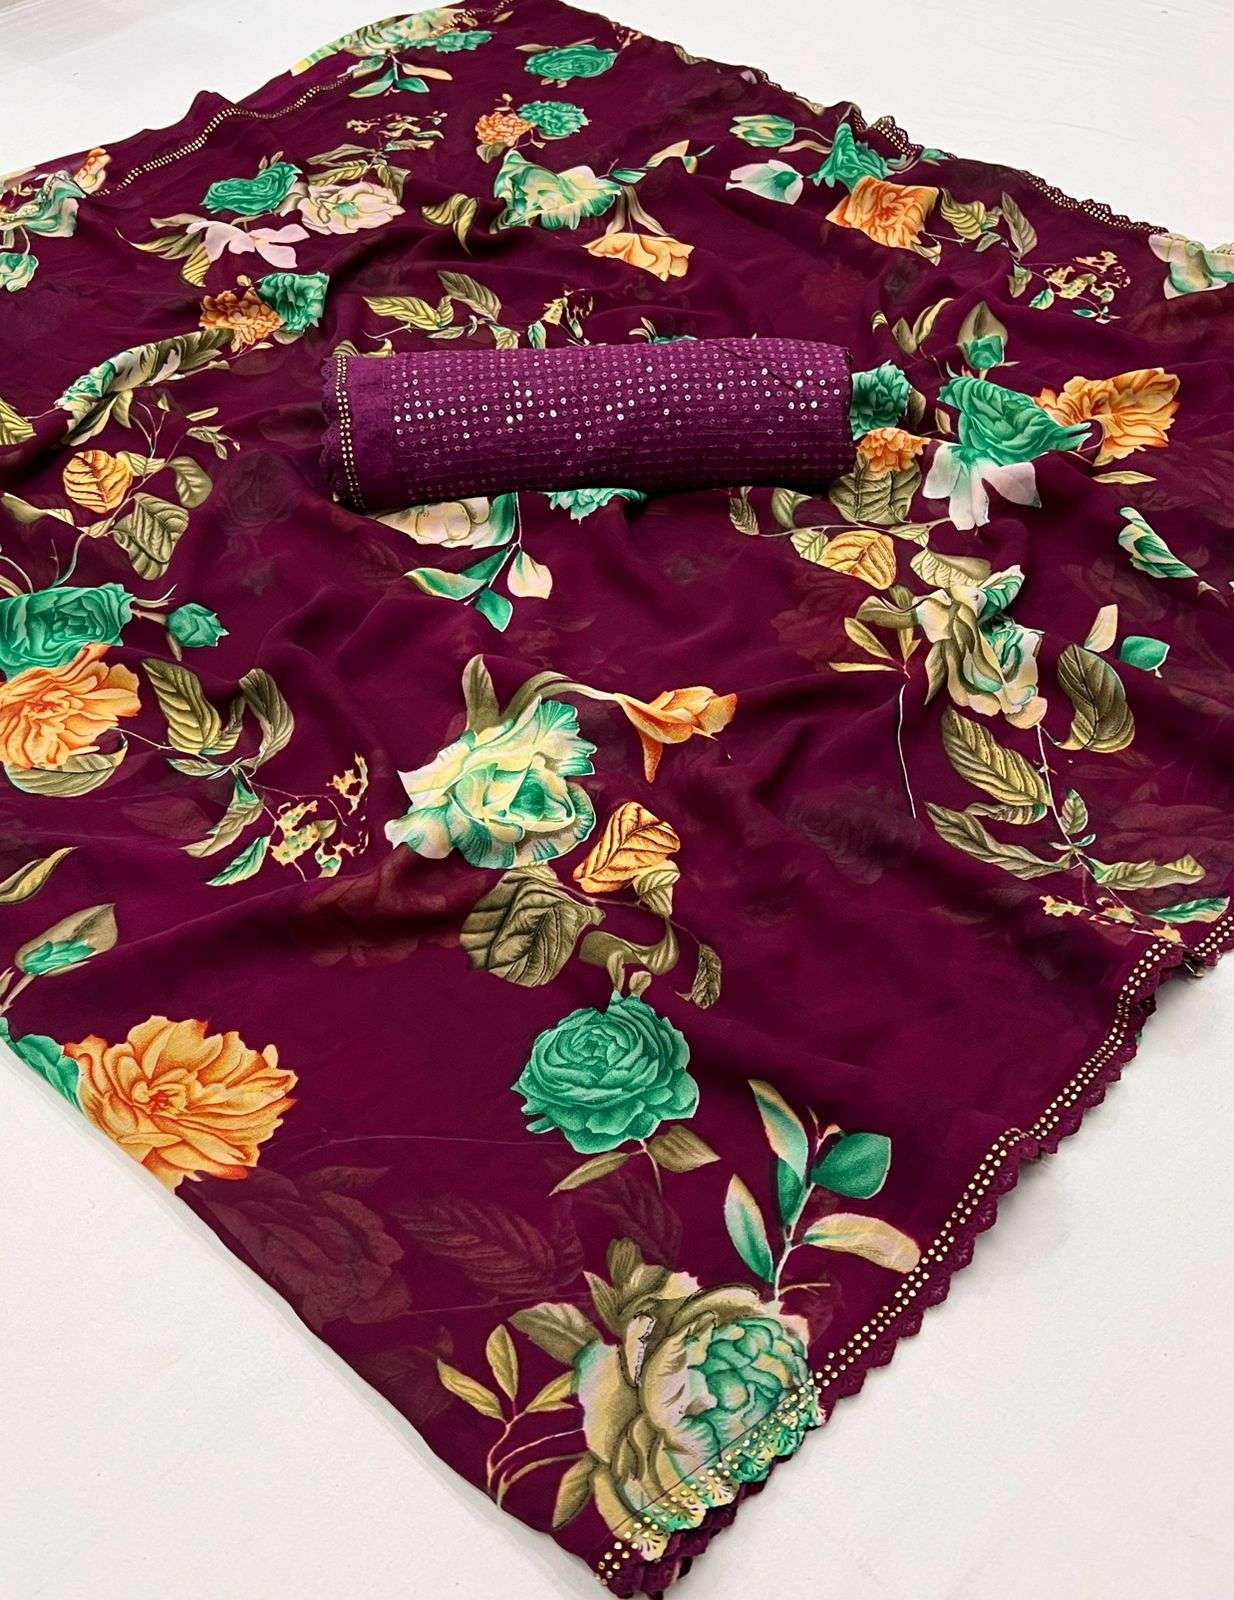 Festival Special Georgette with Flower Printed Saree collect...